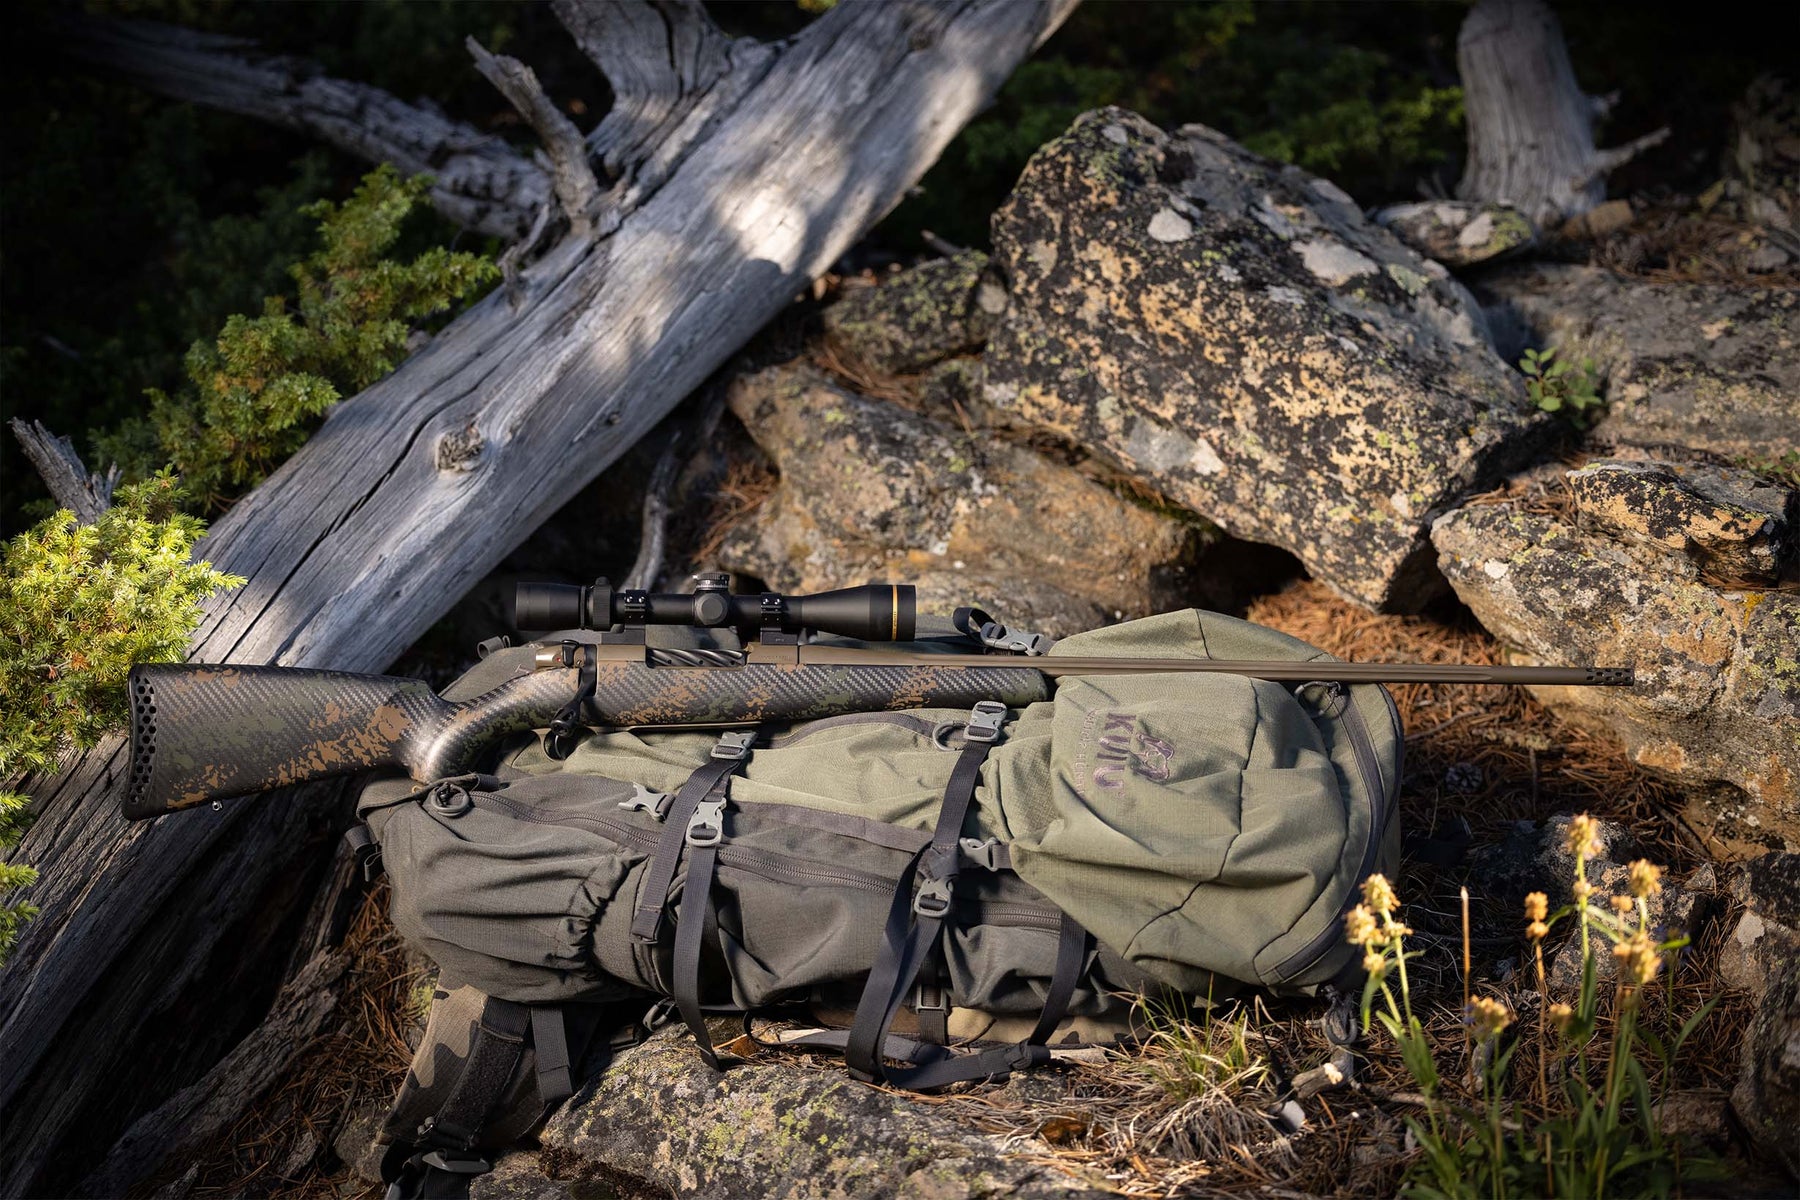 IMAGE OF STOCK ON BACKPACK NEXT TO ROCKS. - INLETS FOR REMINGTON 700, WEATHERBY MARK V AND WEATHERBY VANGUARD / HOWA 1500